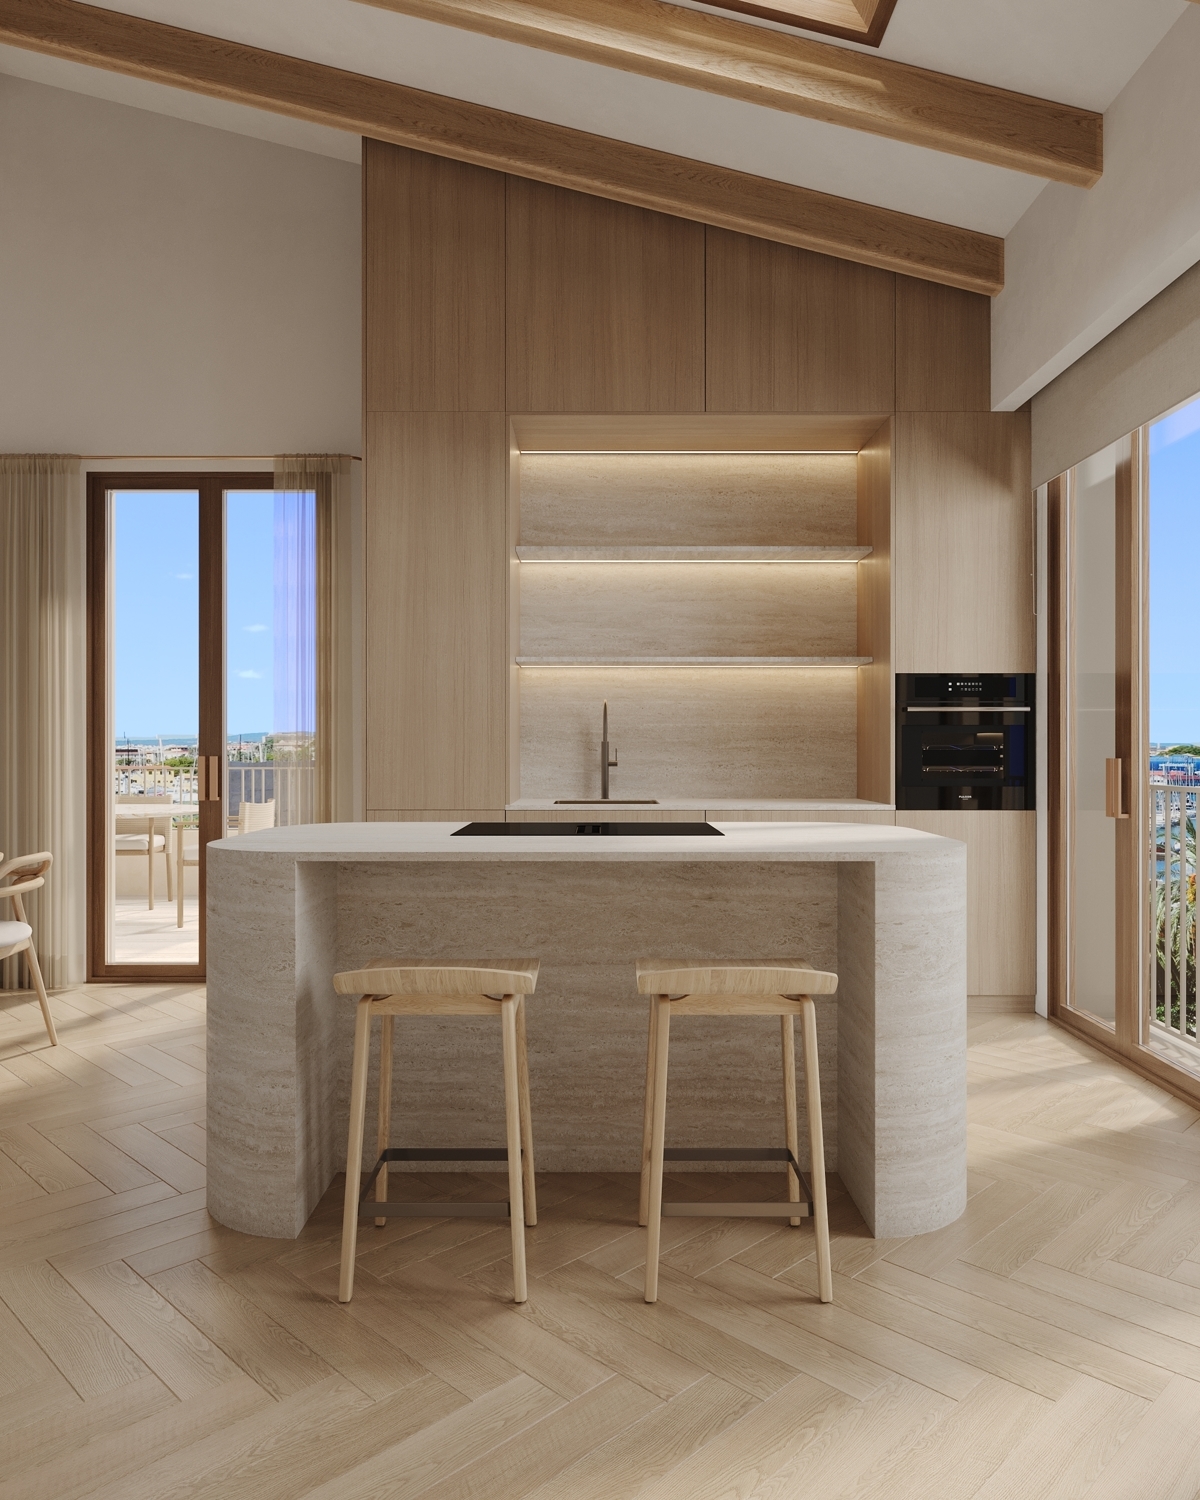 Penthouse mit Pool: Neue Entwicklung in Santa Catalina